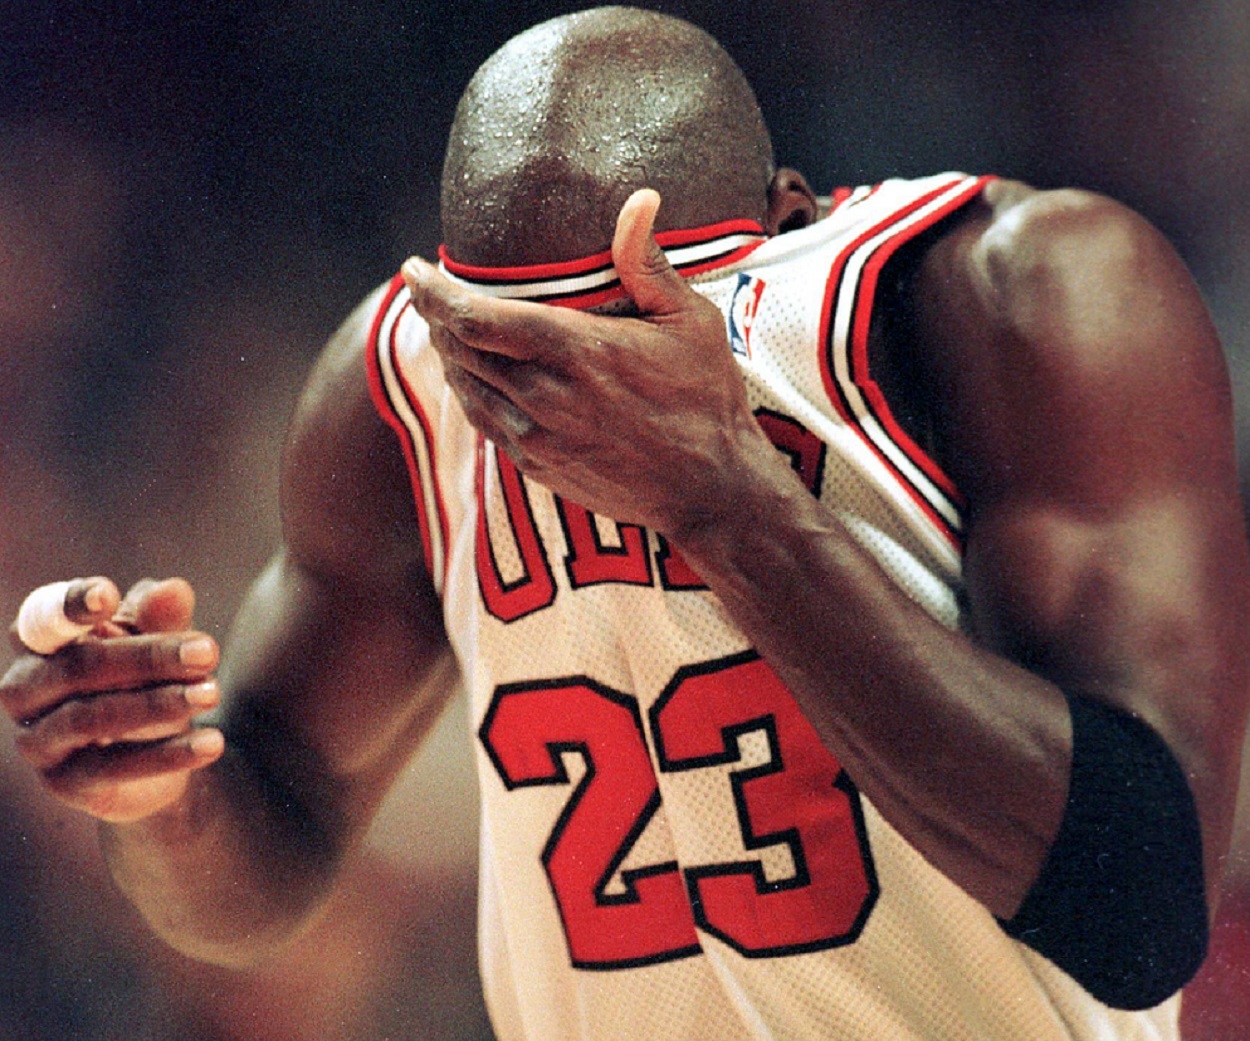 ‘The Last Dance’ Redux: Michael Jordan Has a Rough Shooting Night Against His Future Team as the Bulls Take a Bad Loss to the Wizards to Drop to .500